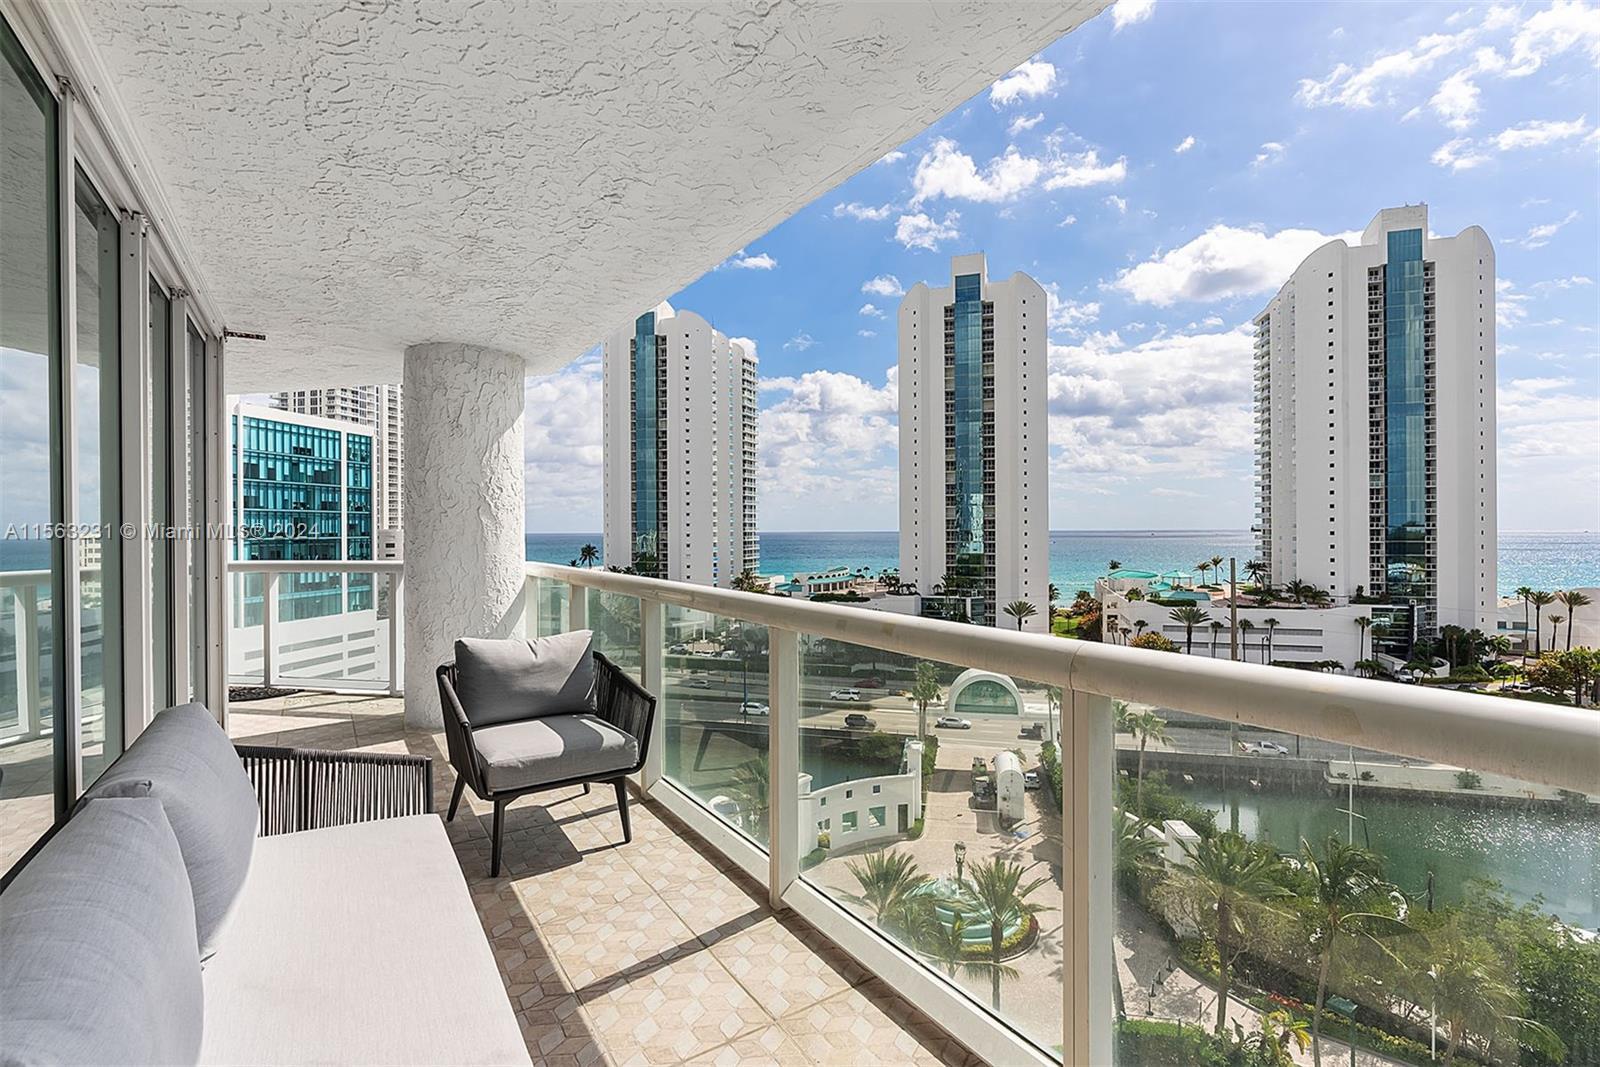 Indulge in luxury living at Oceania in Sunny Isles Beach. This fully remodeled gem features 2 beds, 